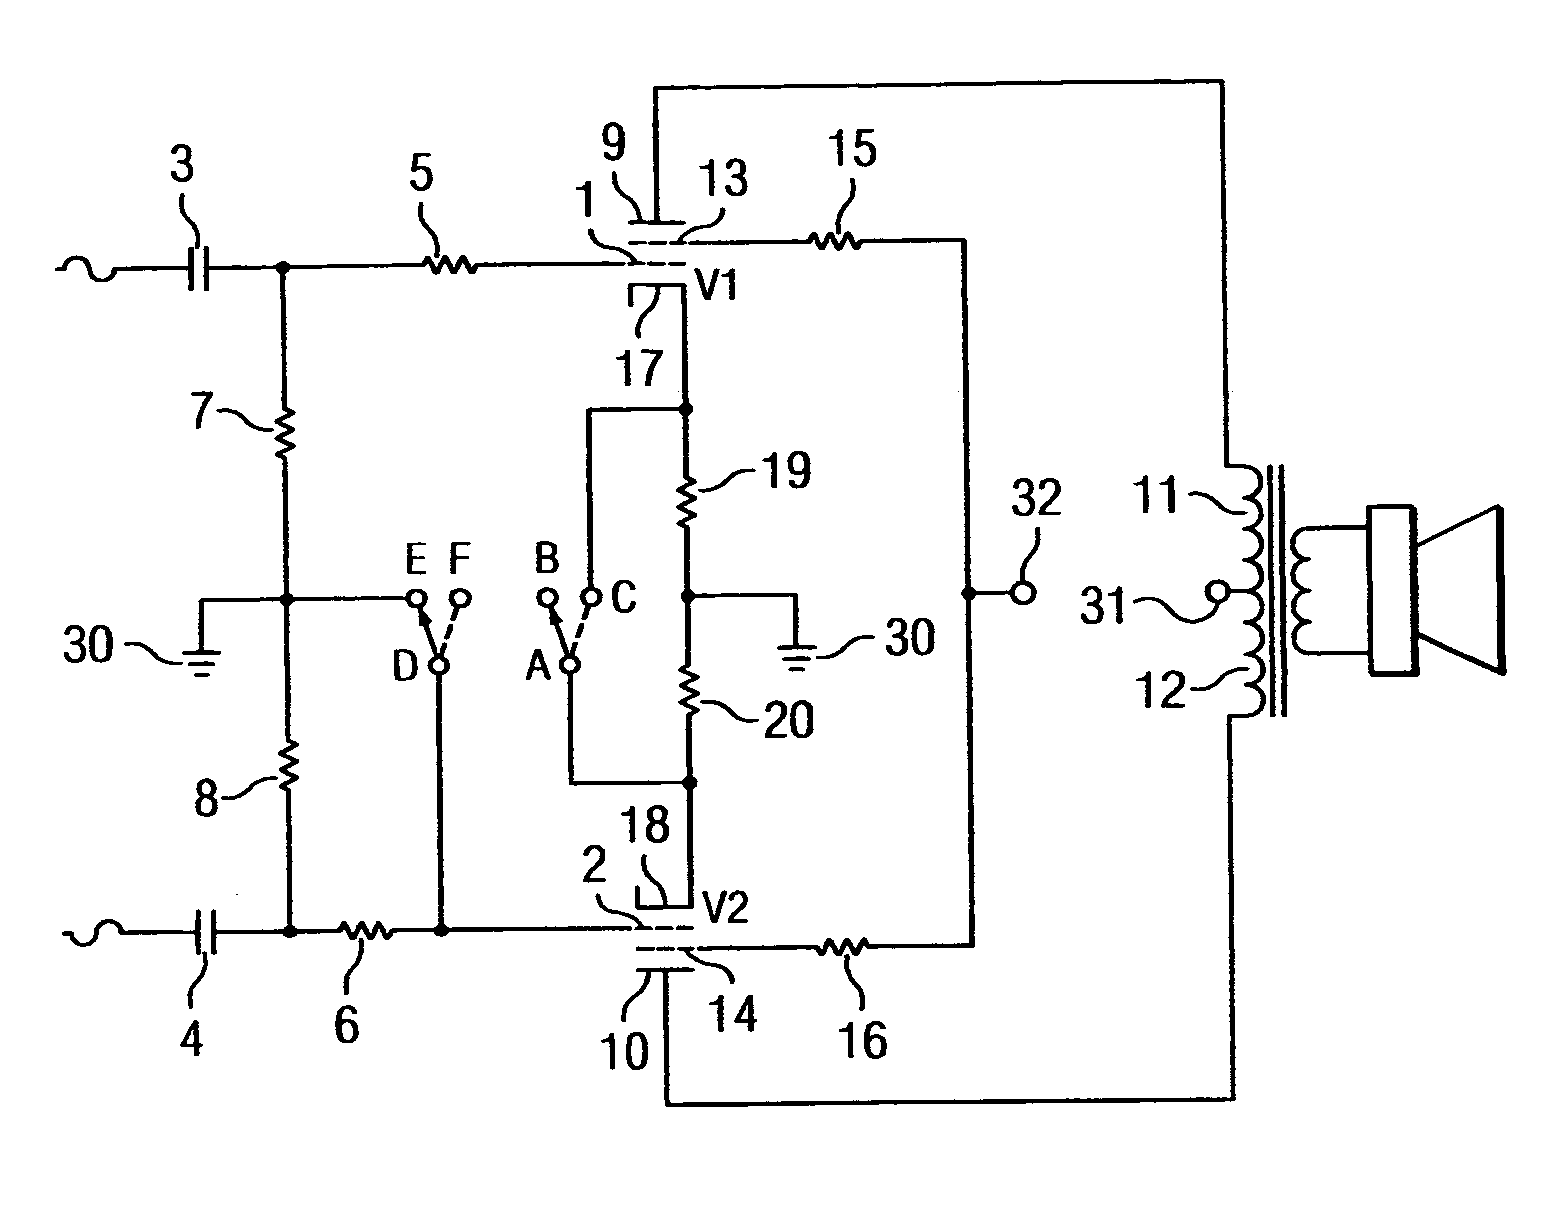 Vacuum tube power amplifier switchable between push-pull and single ended configurations